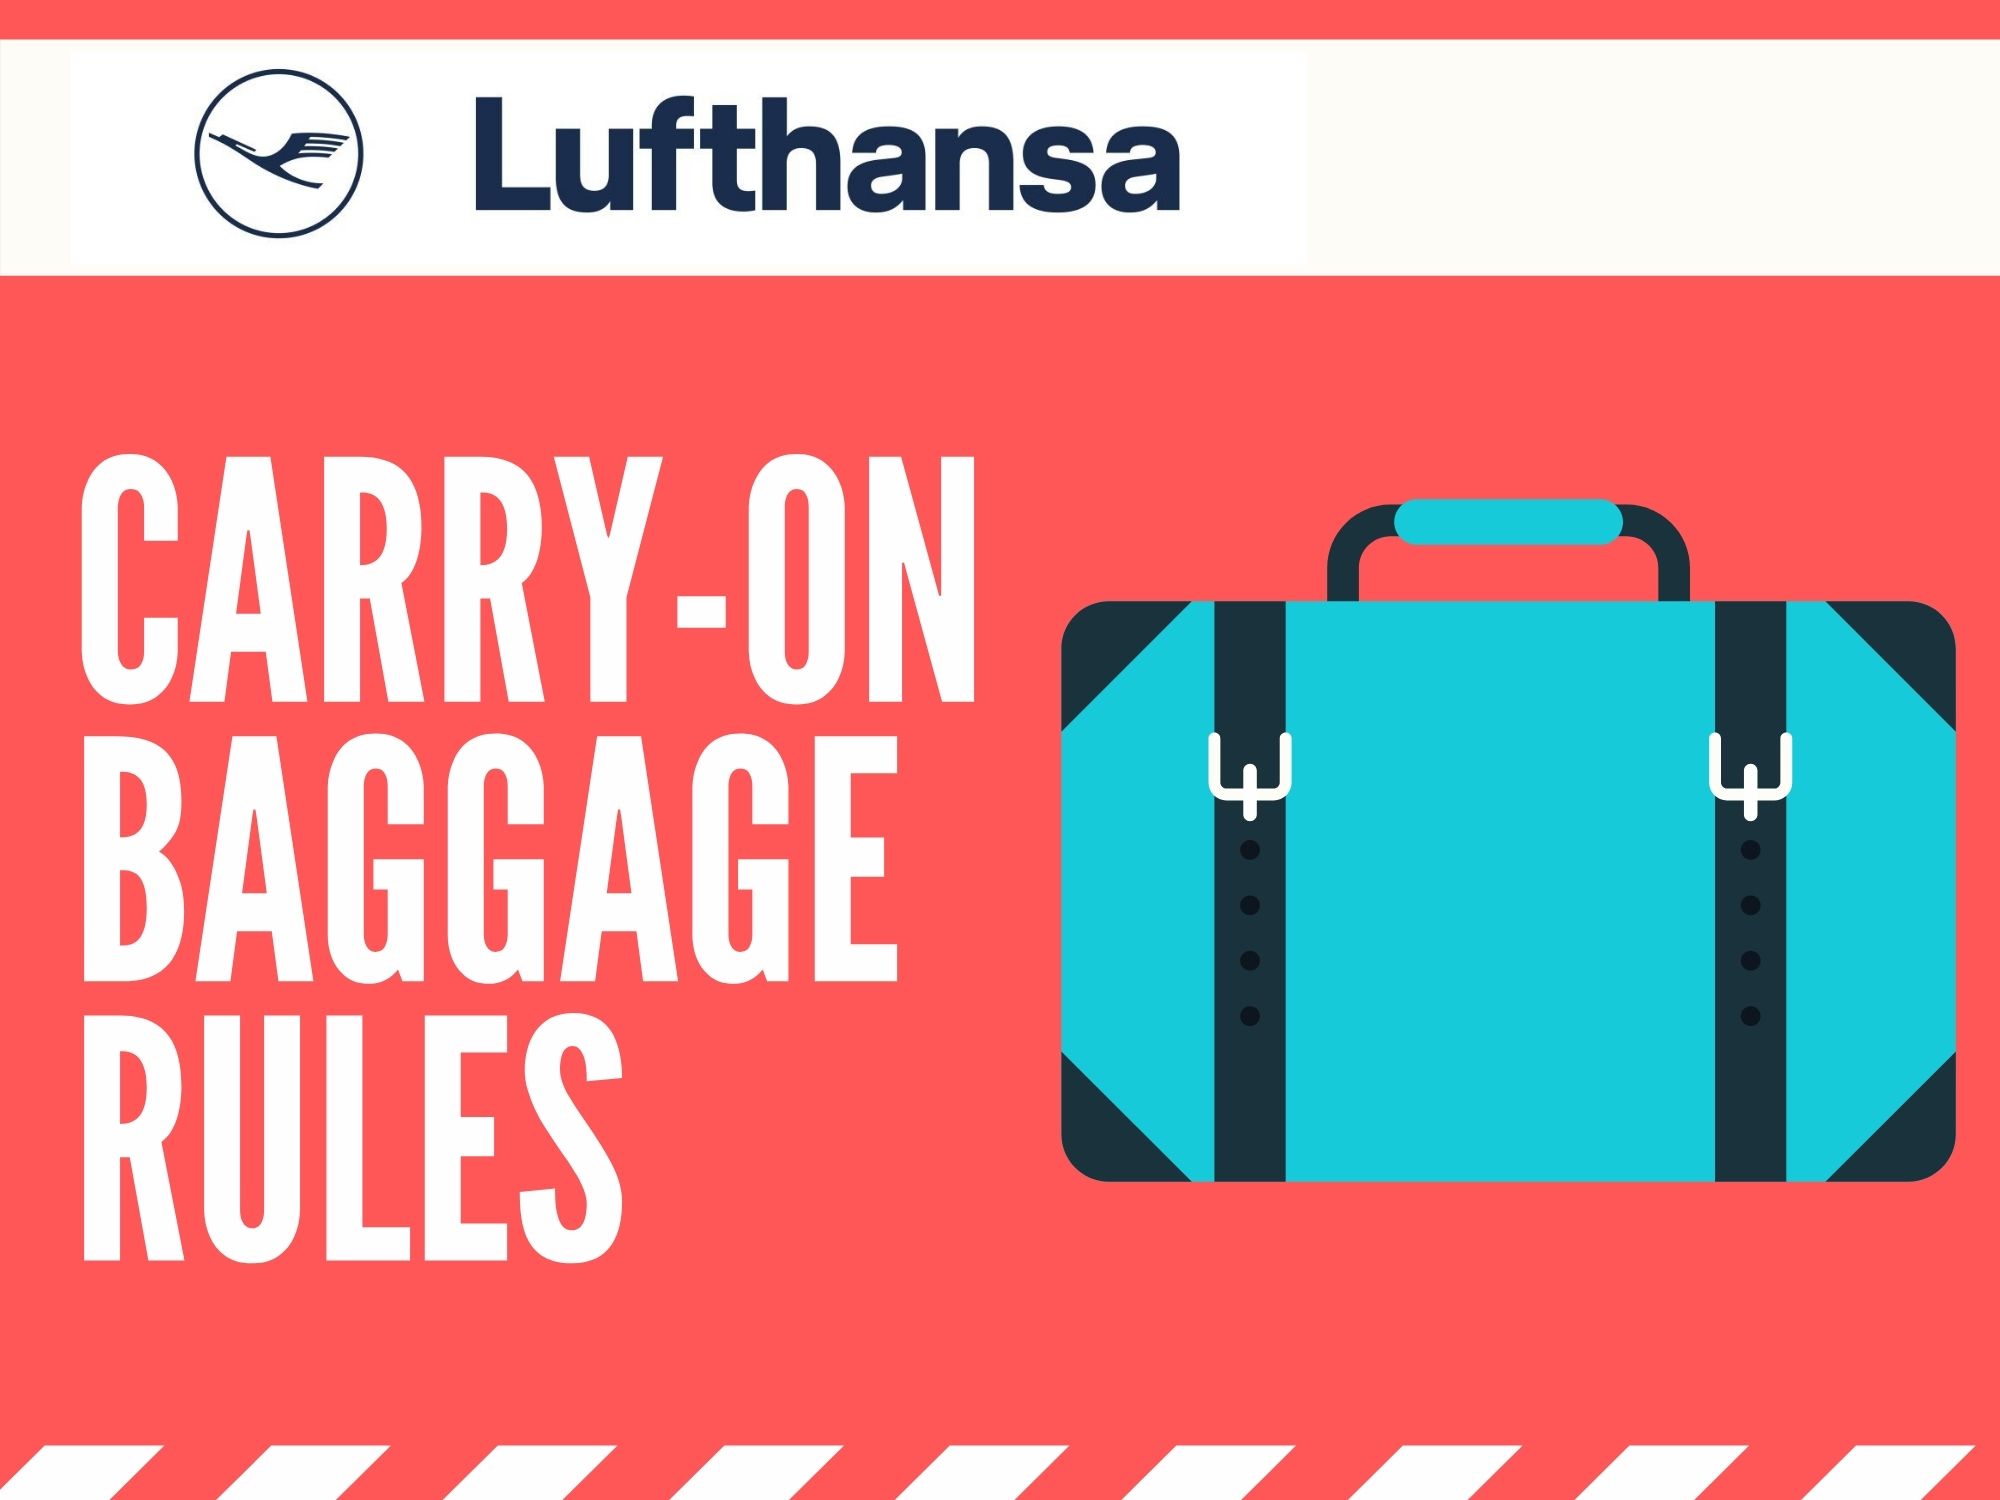 southwest carry on bag policy